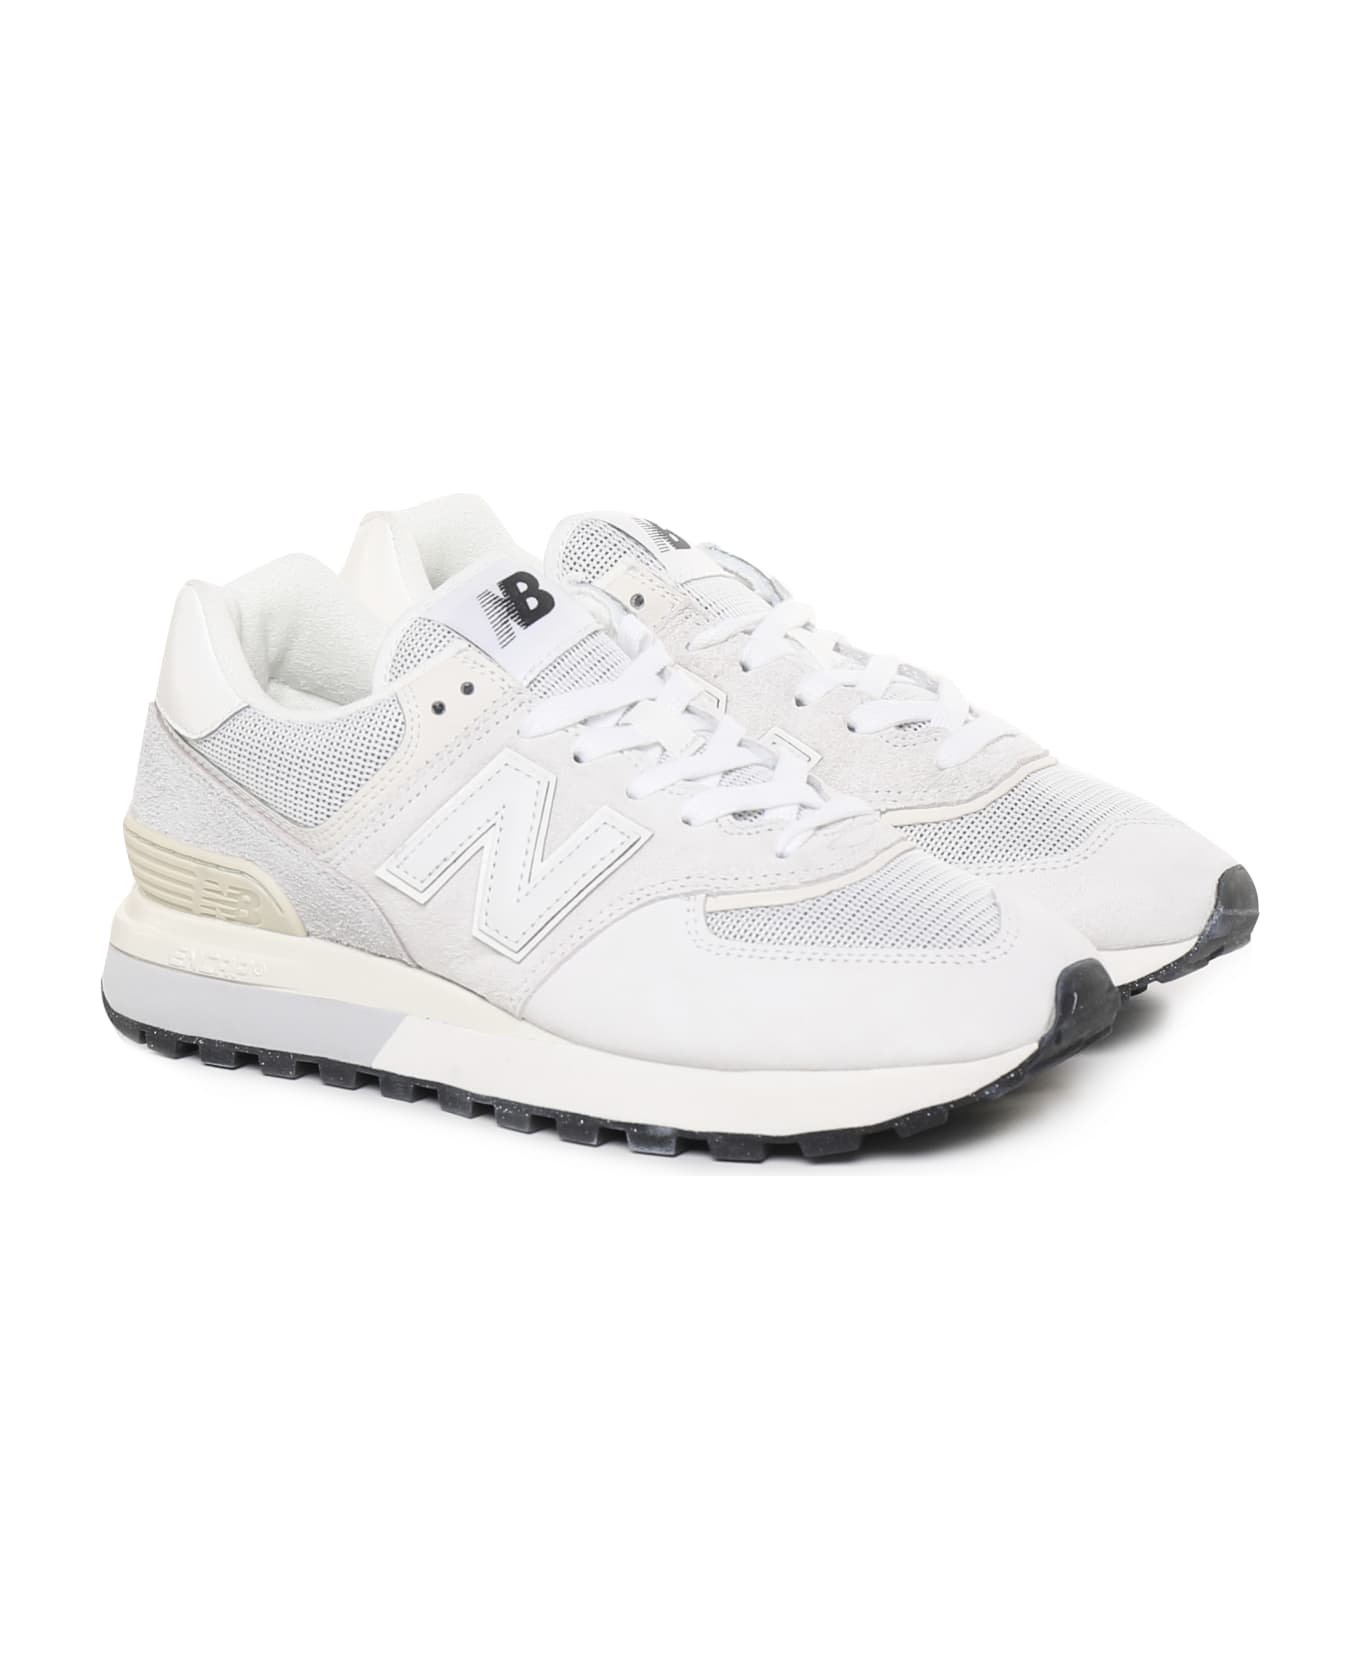 New Balance 574 Sneakers - Reflection